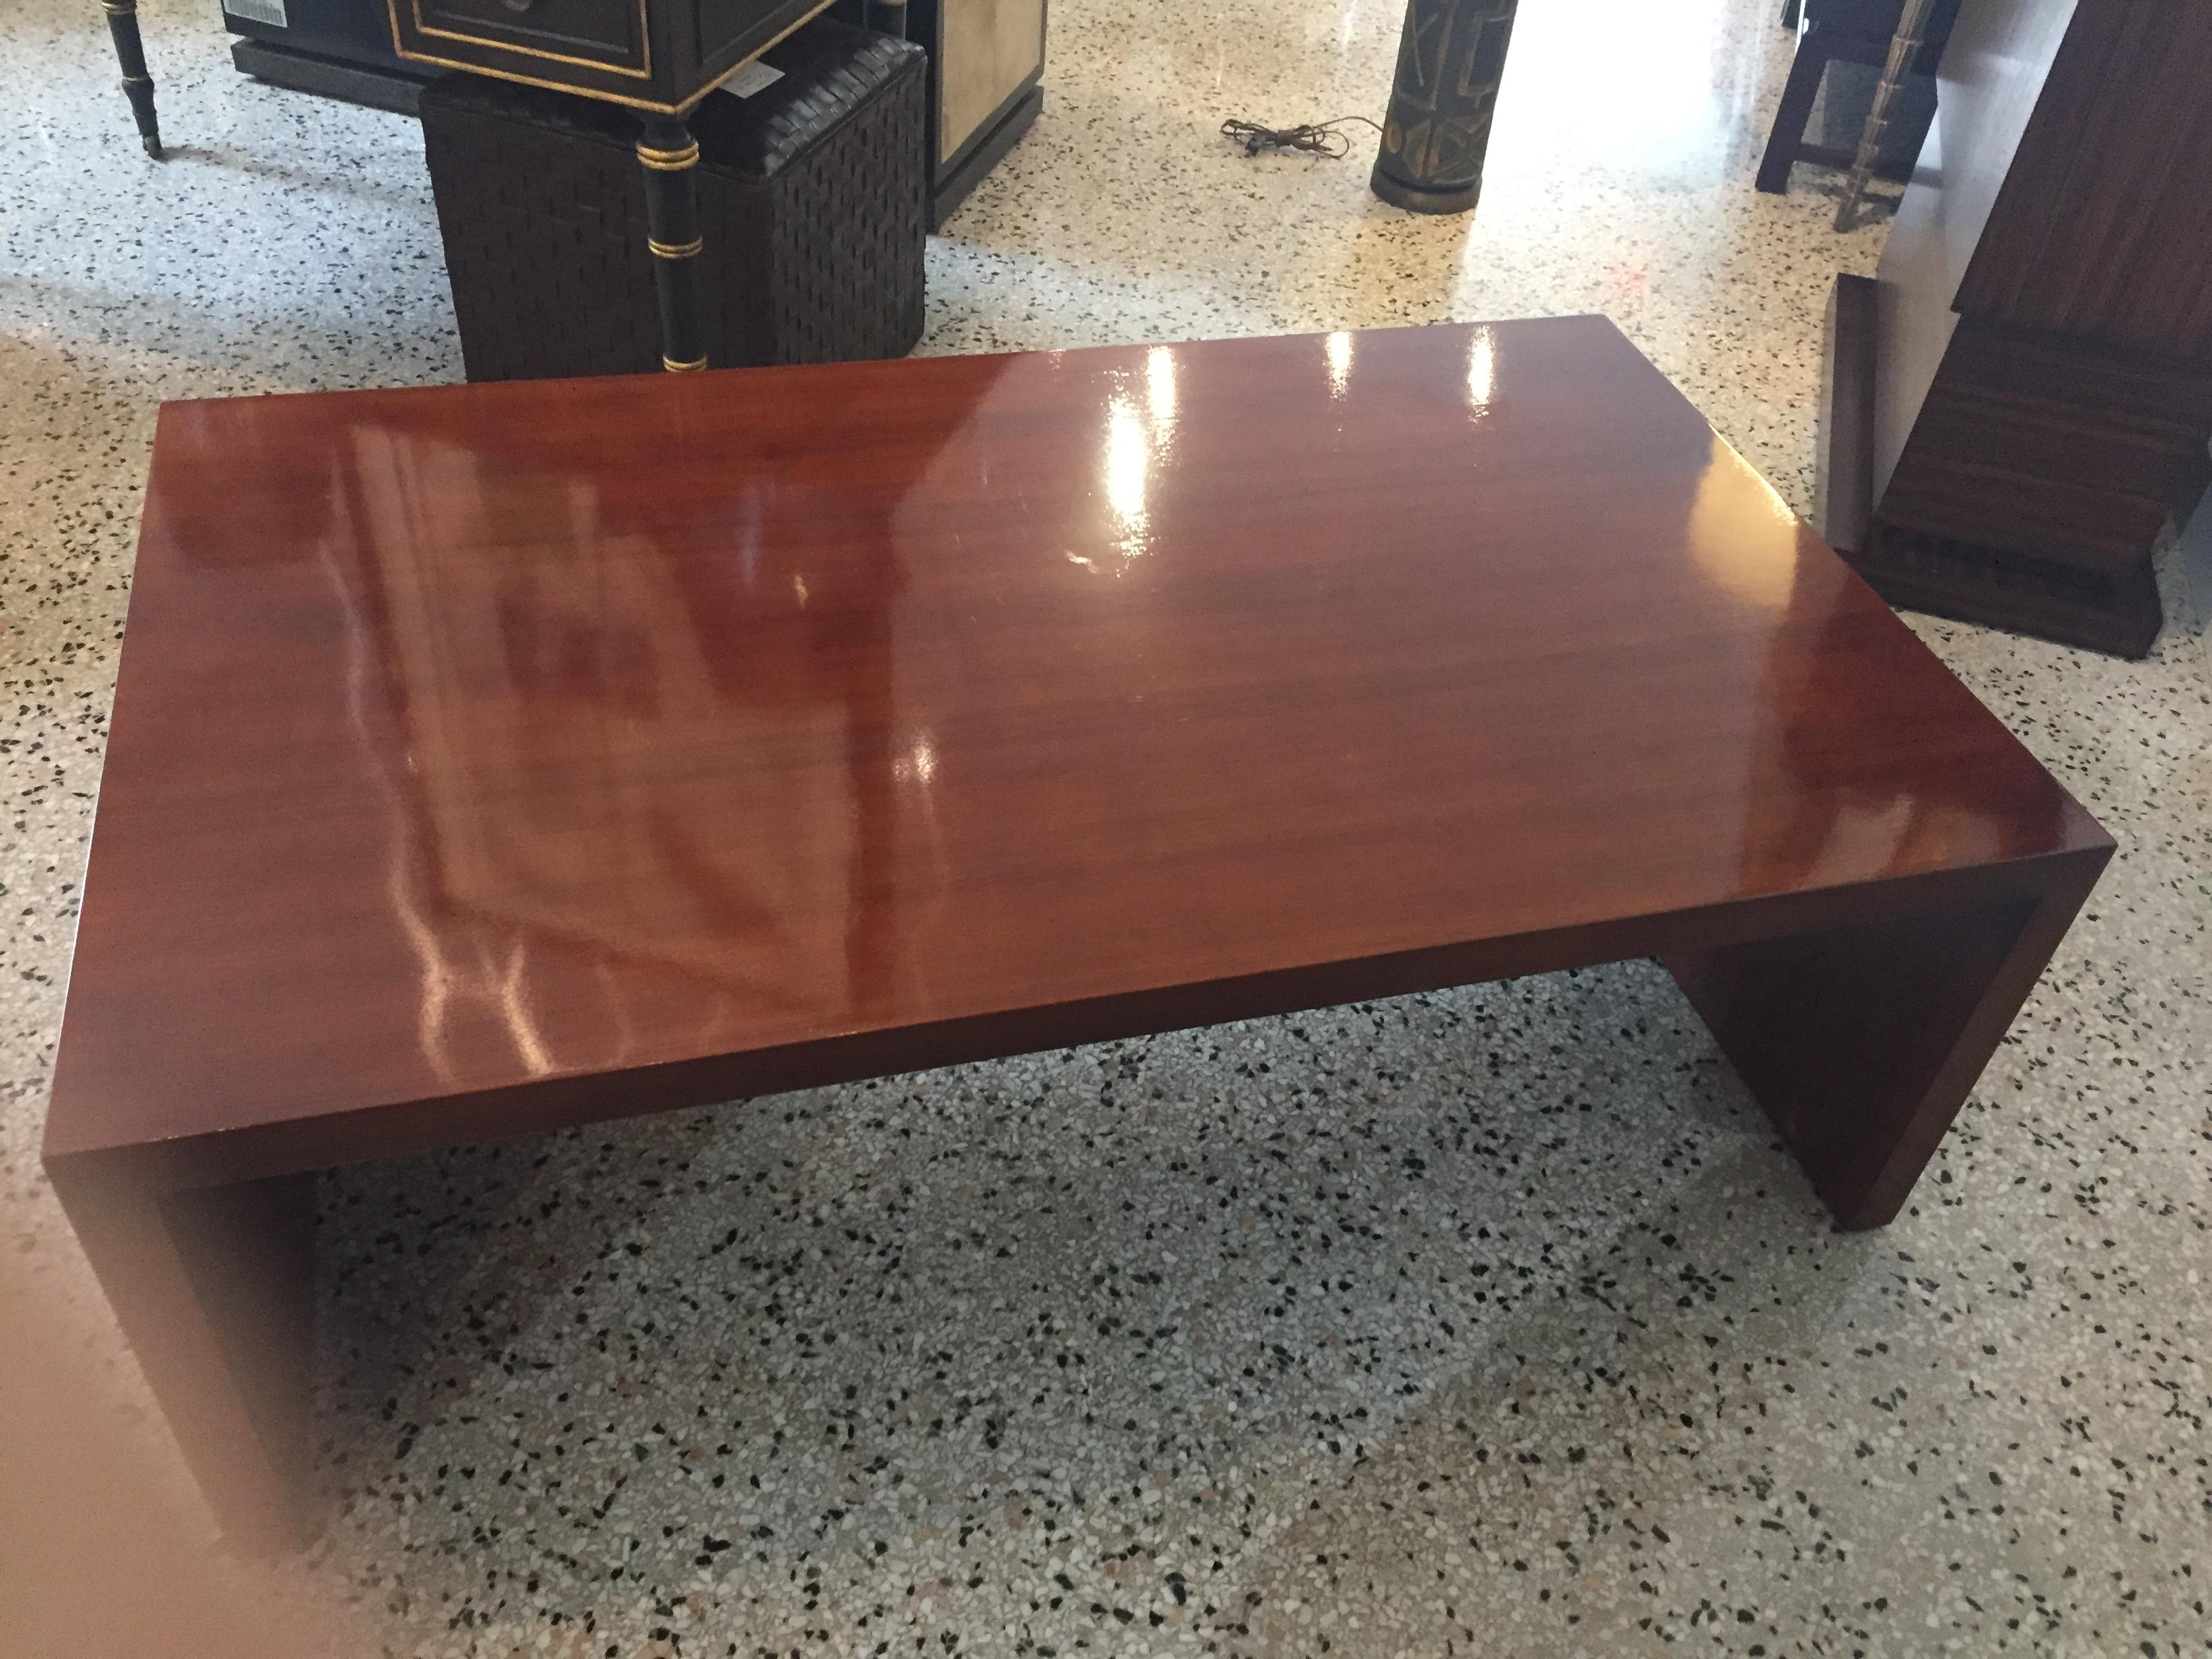 Mahogany waterfall cocktail table in polished wood midcentury minimalism from a Palm Beach estate.

Note, the last picture shows a faint area in the back left corner of sun bleaching -- the section is approximately 4